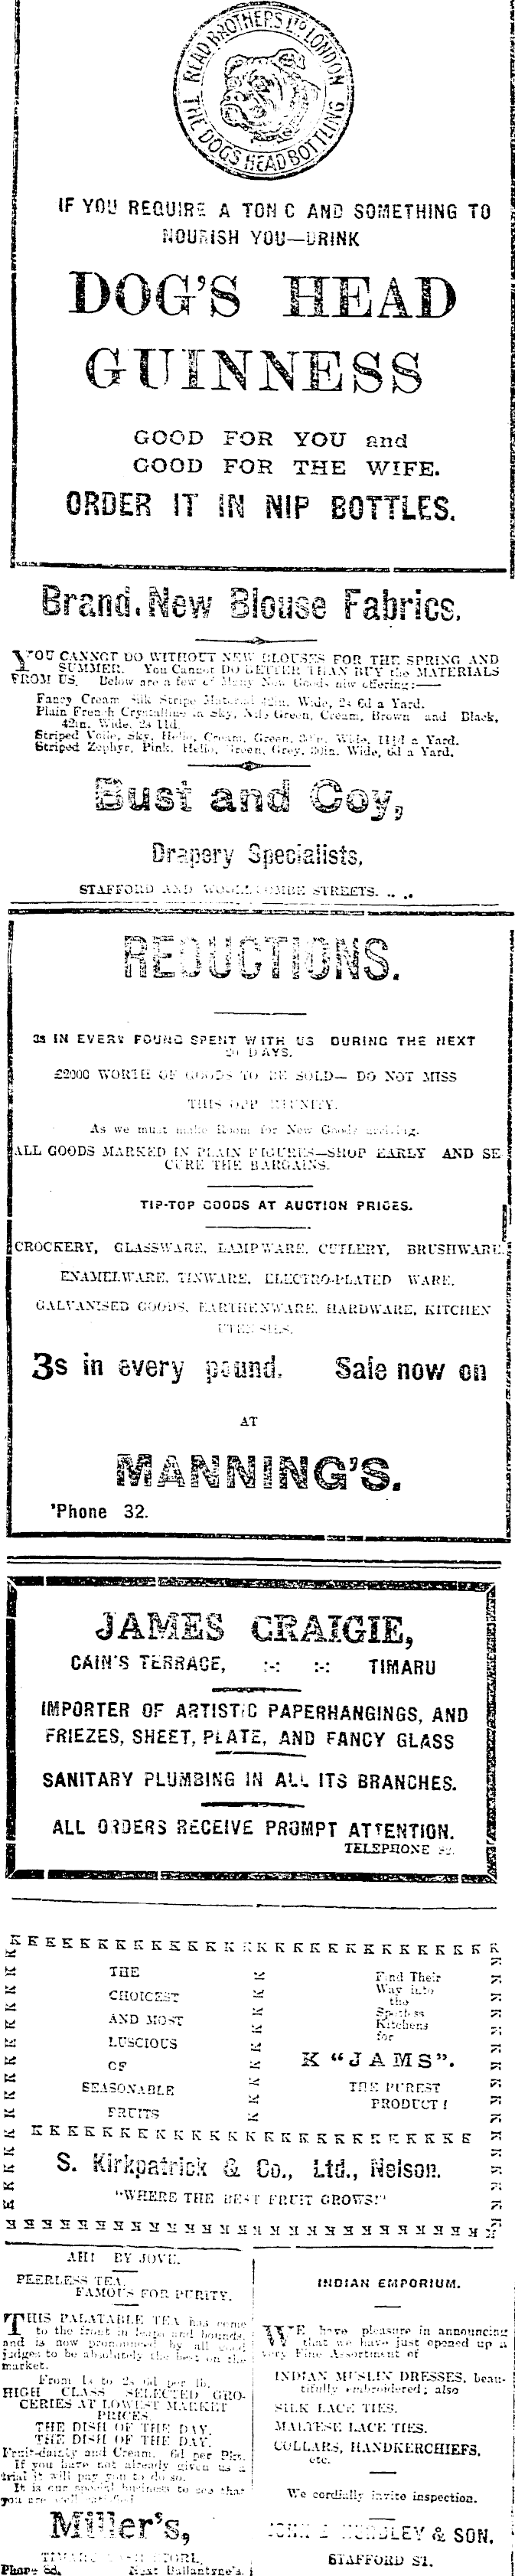 Papers Past Newspapers Timaru Herald 4 November 1910 Page 3 Advertisements Column 1